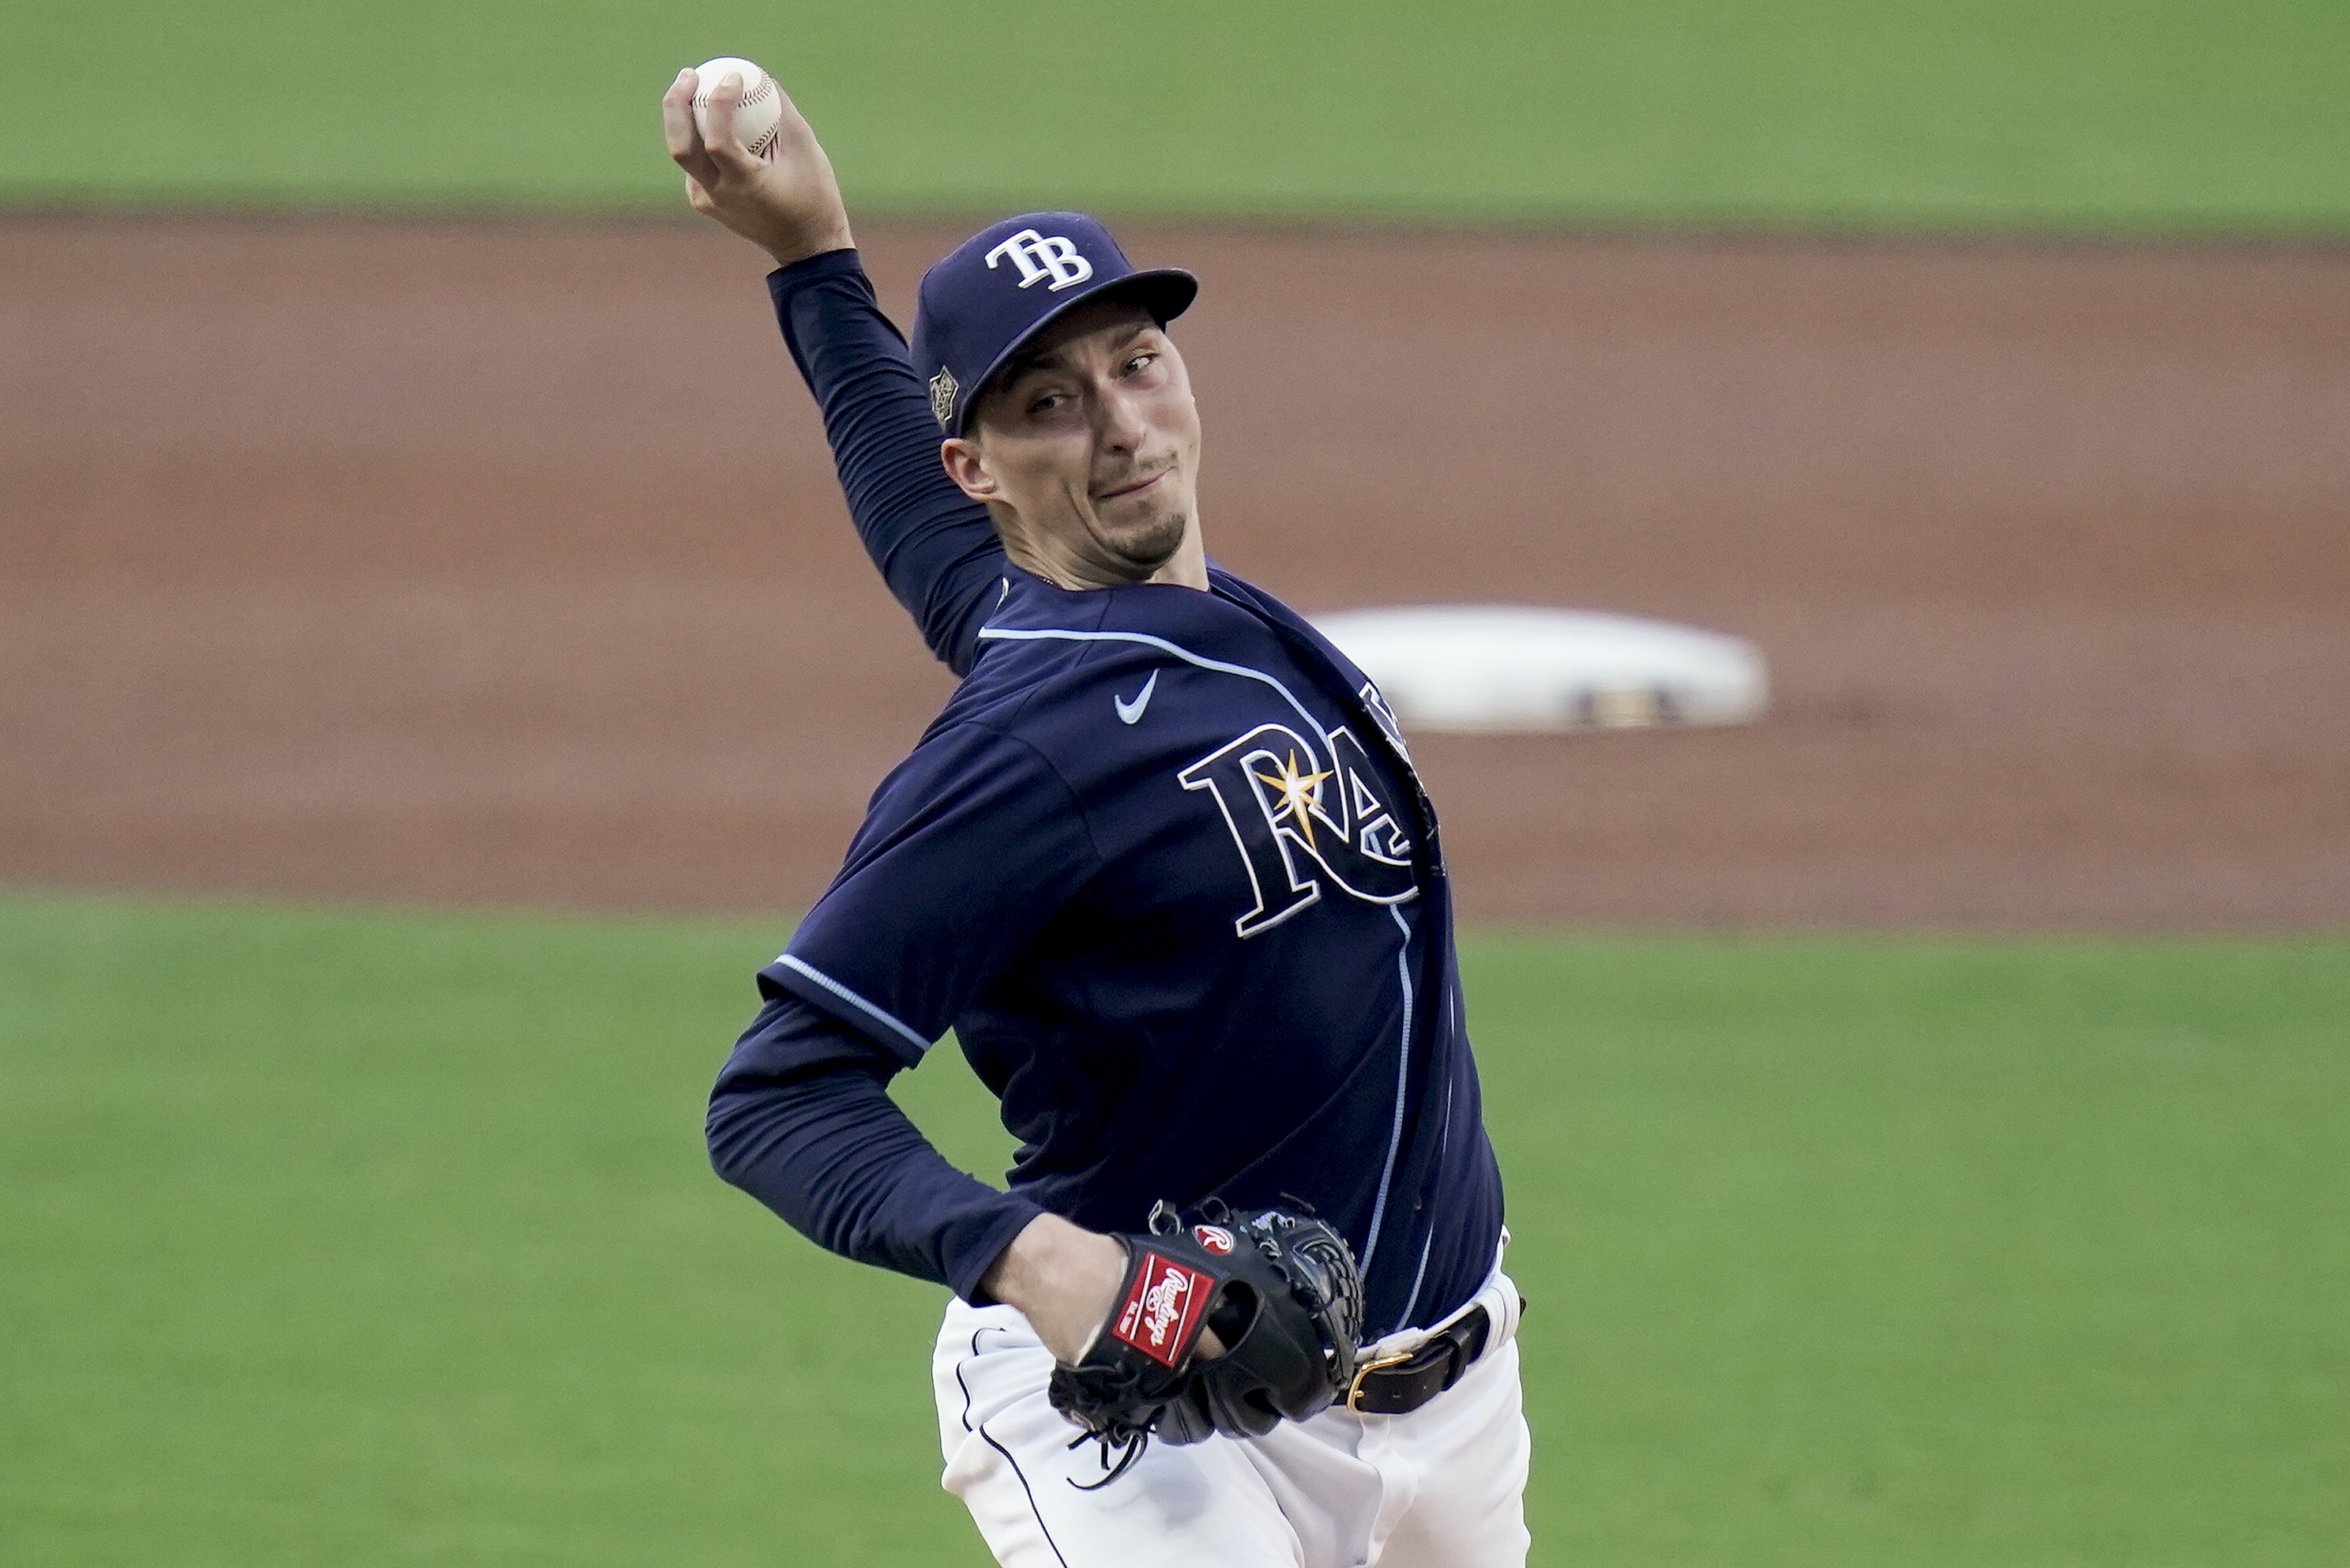 Sources: Rays' Cy Young Award winner Blake Snell to undergo